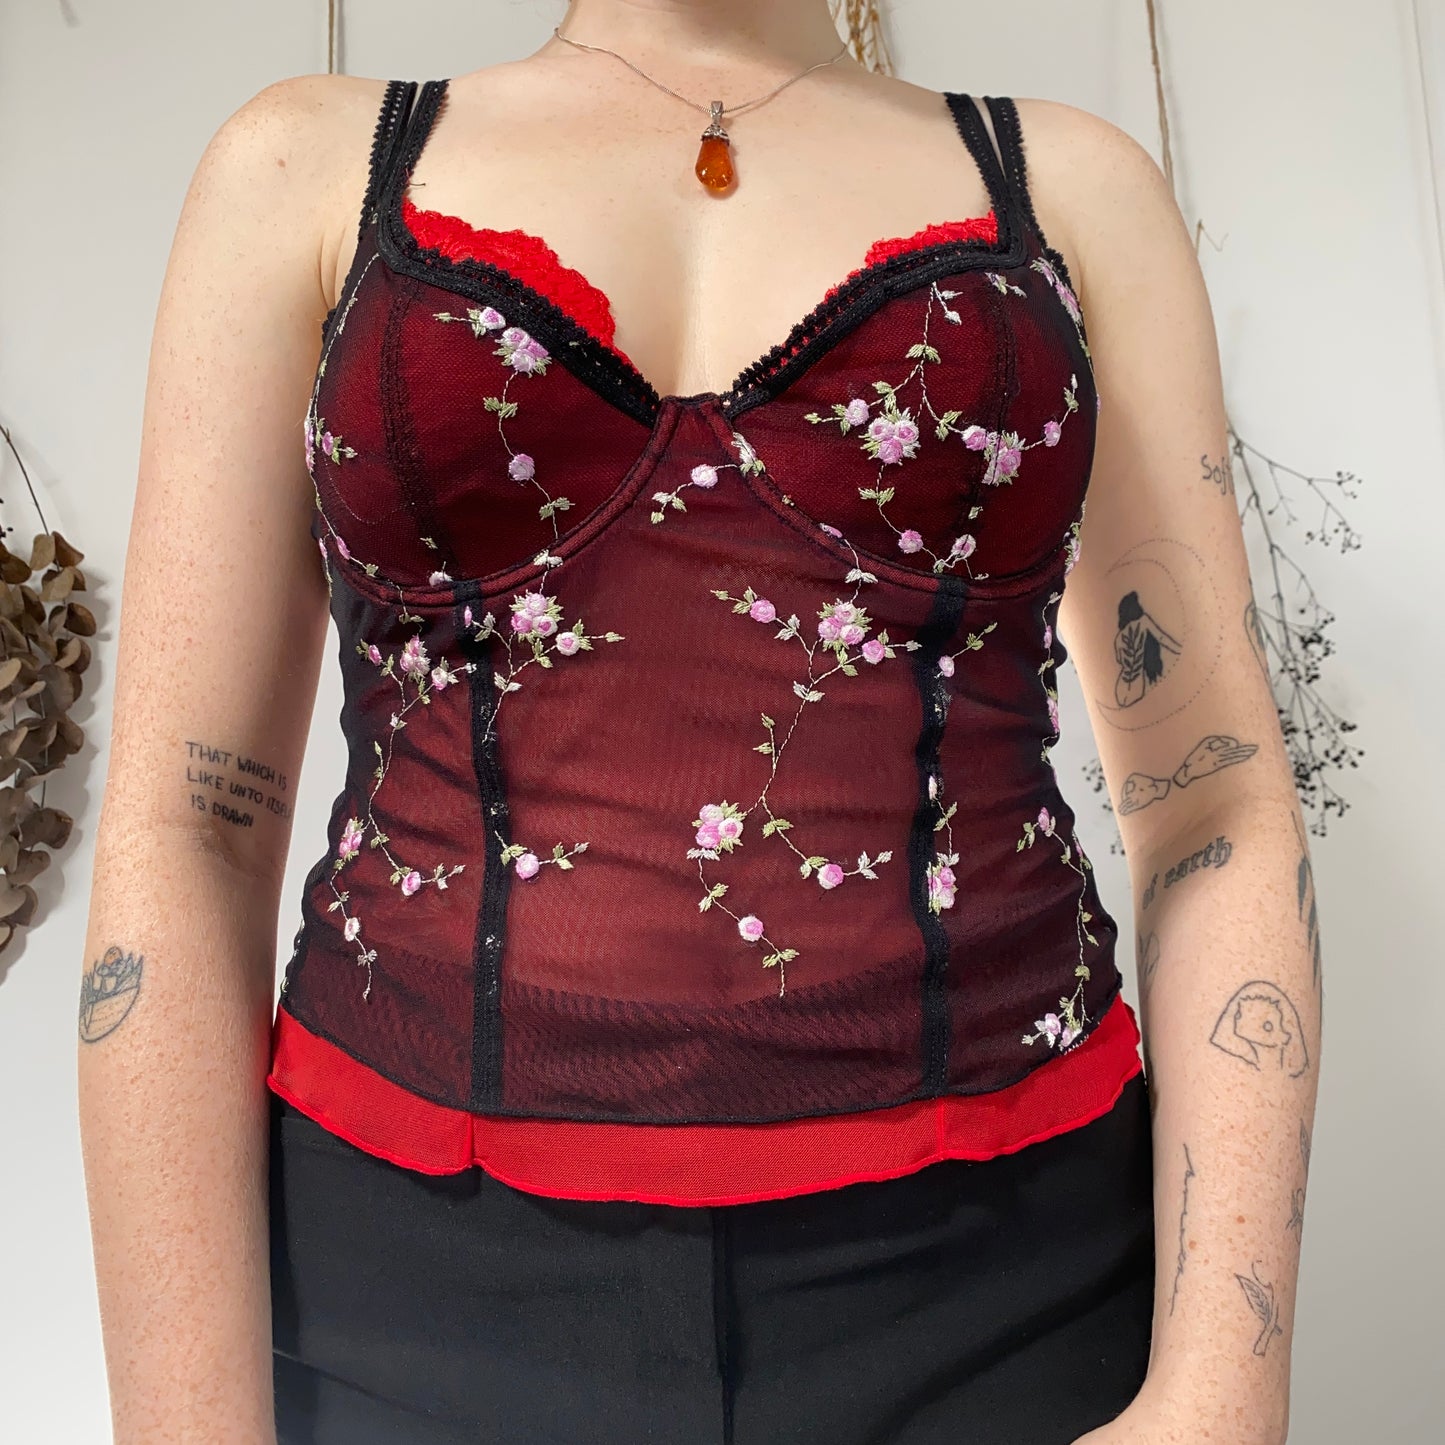 Floral embroidered mesh corset - size M/L